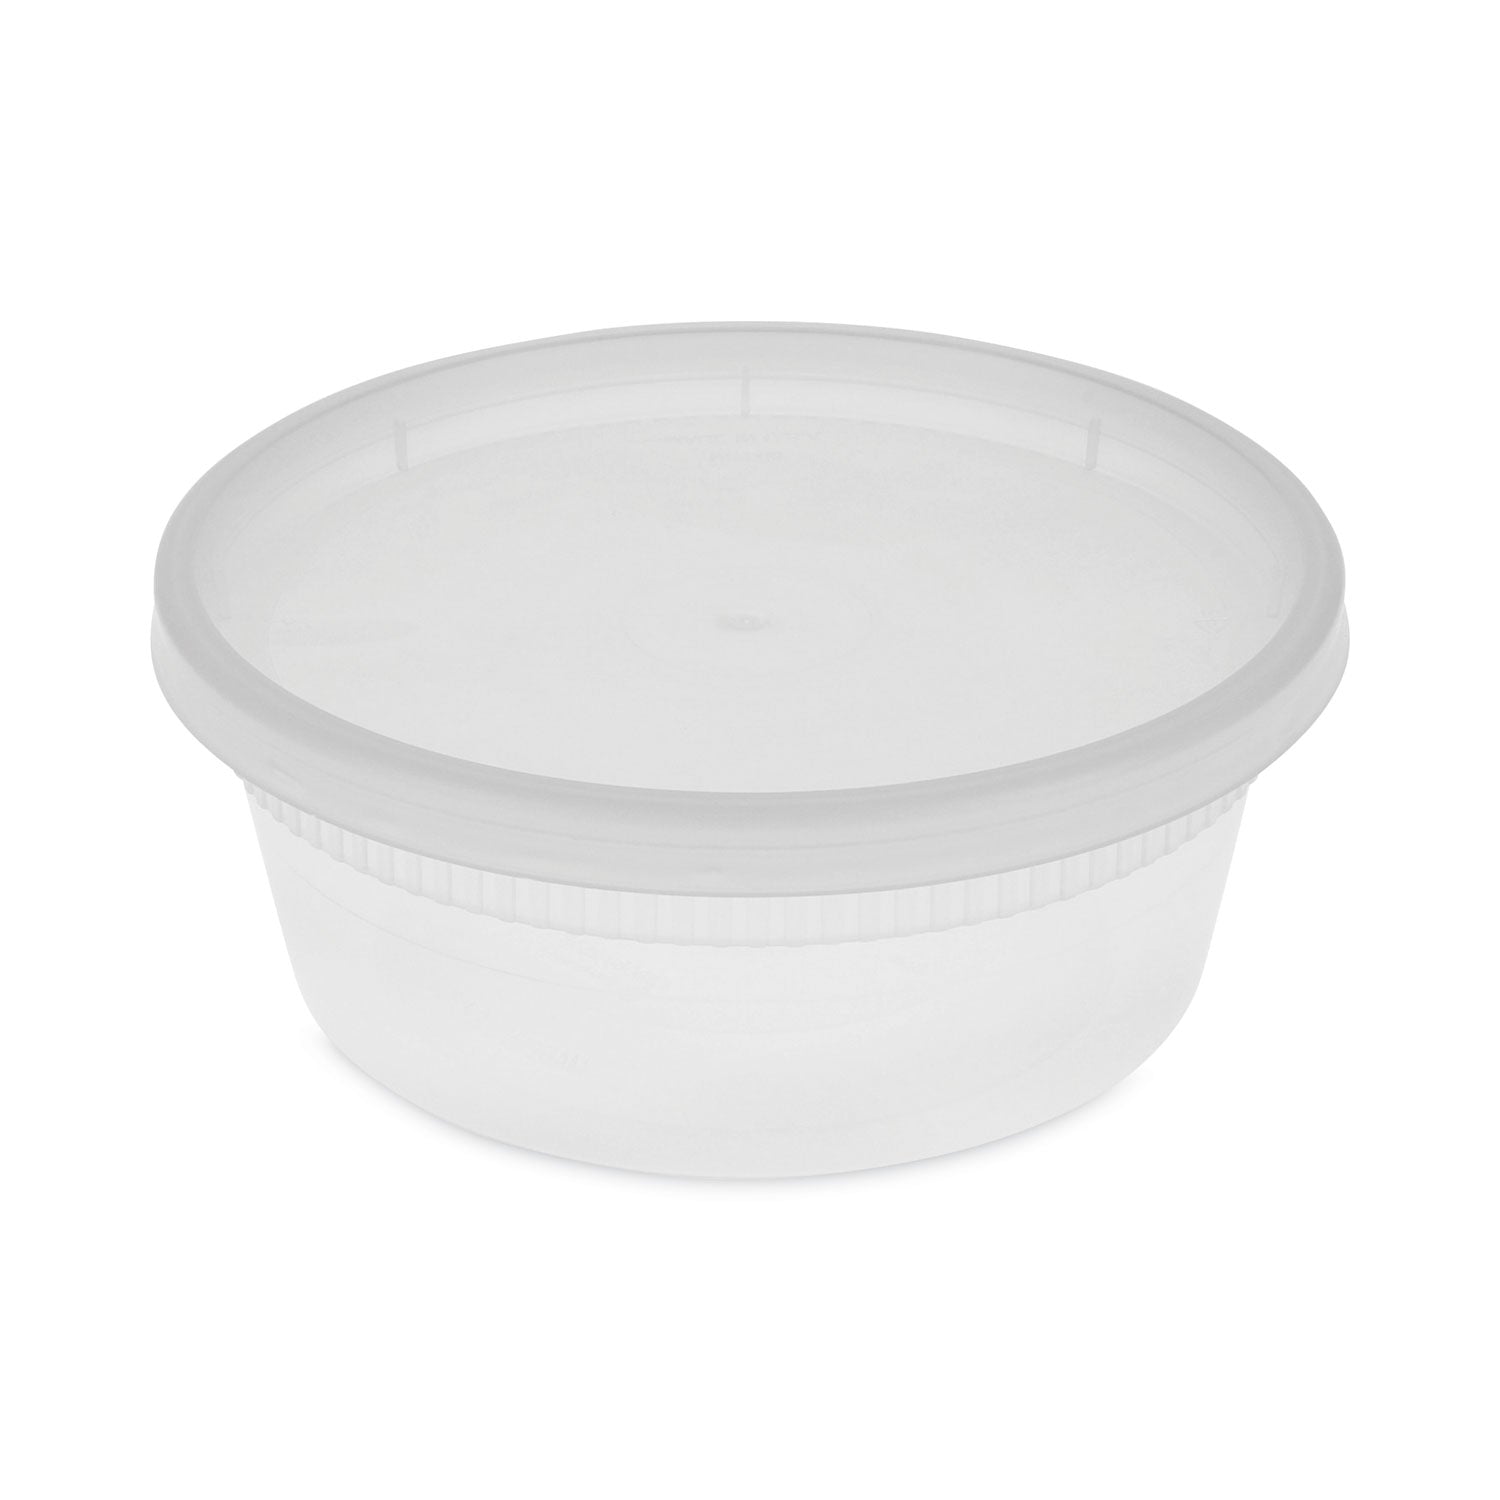 Newspring DELItainer Microwavable Container, 8 oz, 1.13 x 2.8 x 1.33, Clear, Plastic, 240/Carton - 